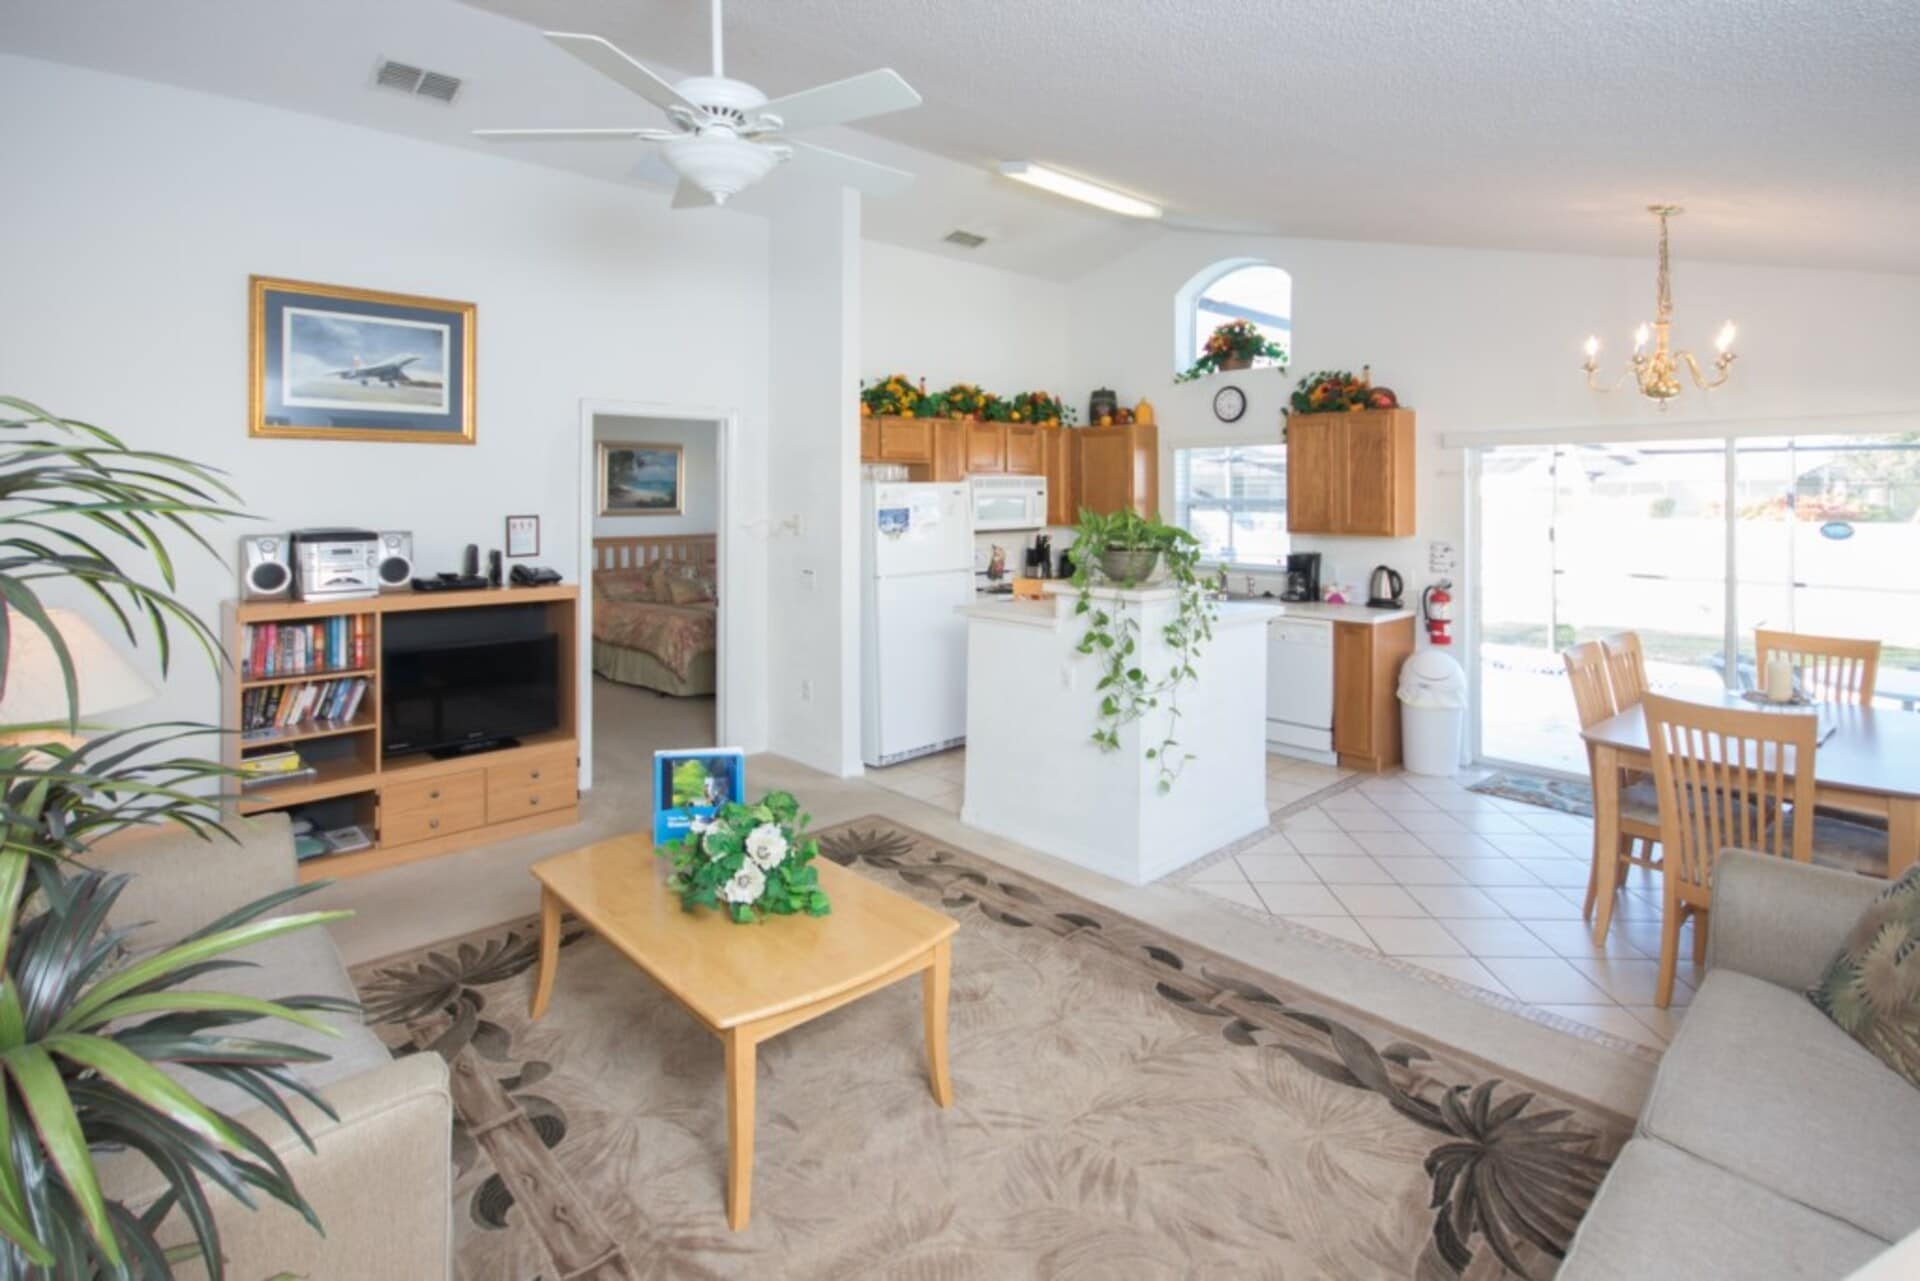 Property Image 2 - The Ultimate 3 Bedroom Villa on The Abbey at West Haven, Florida Villa 6120